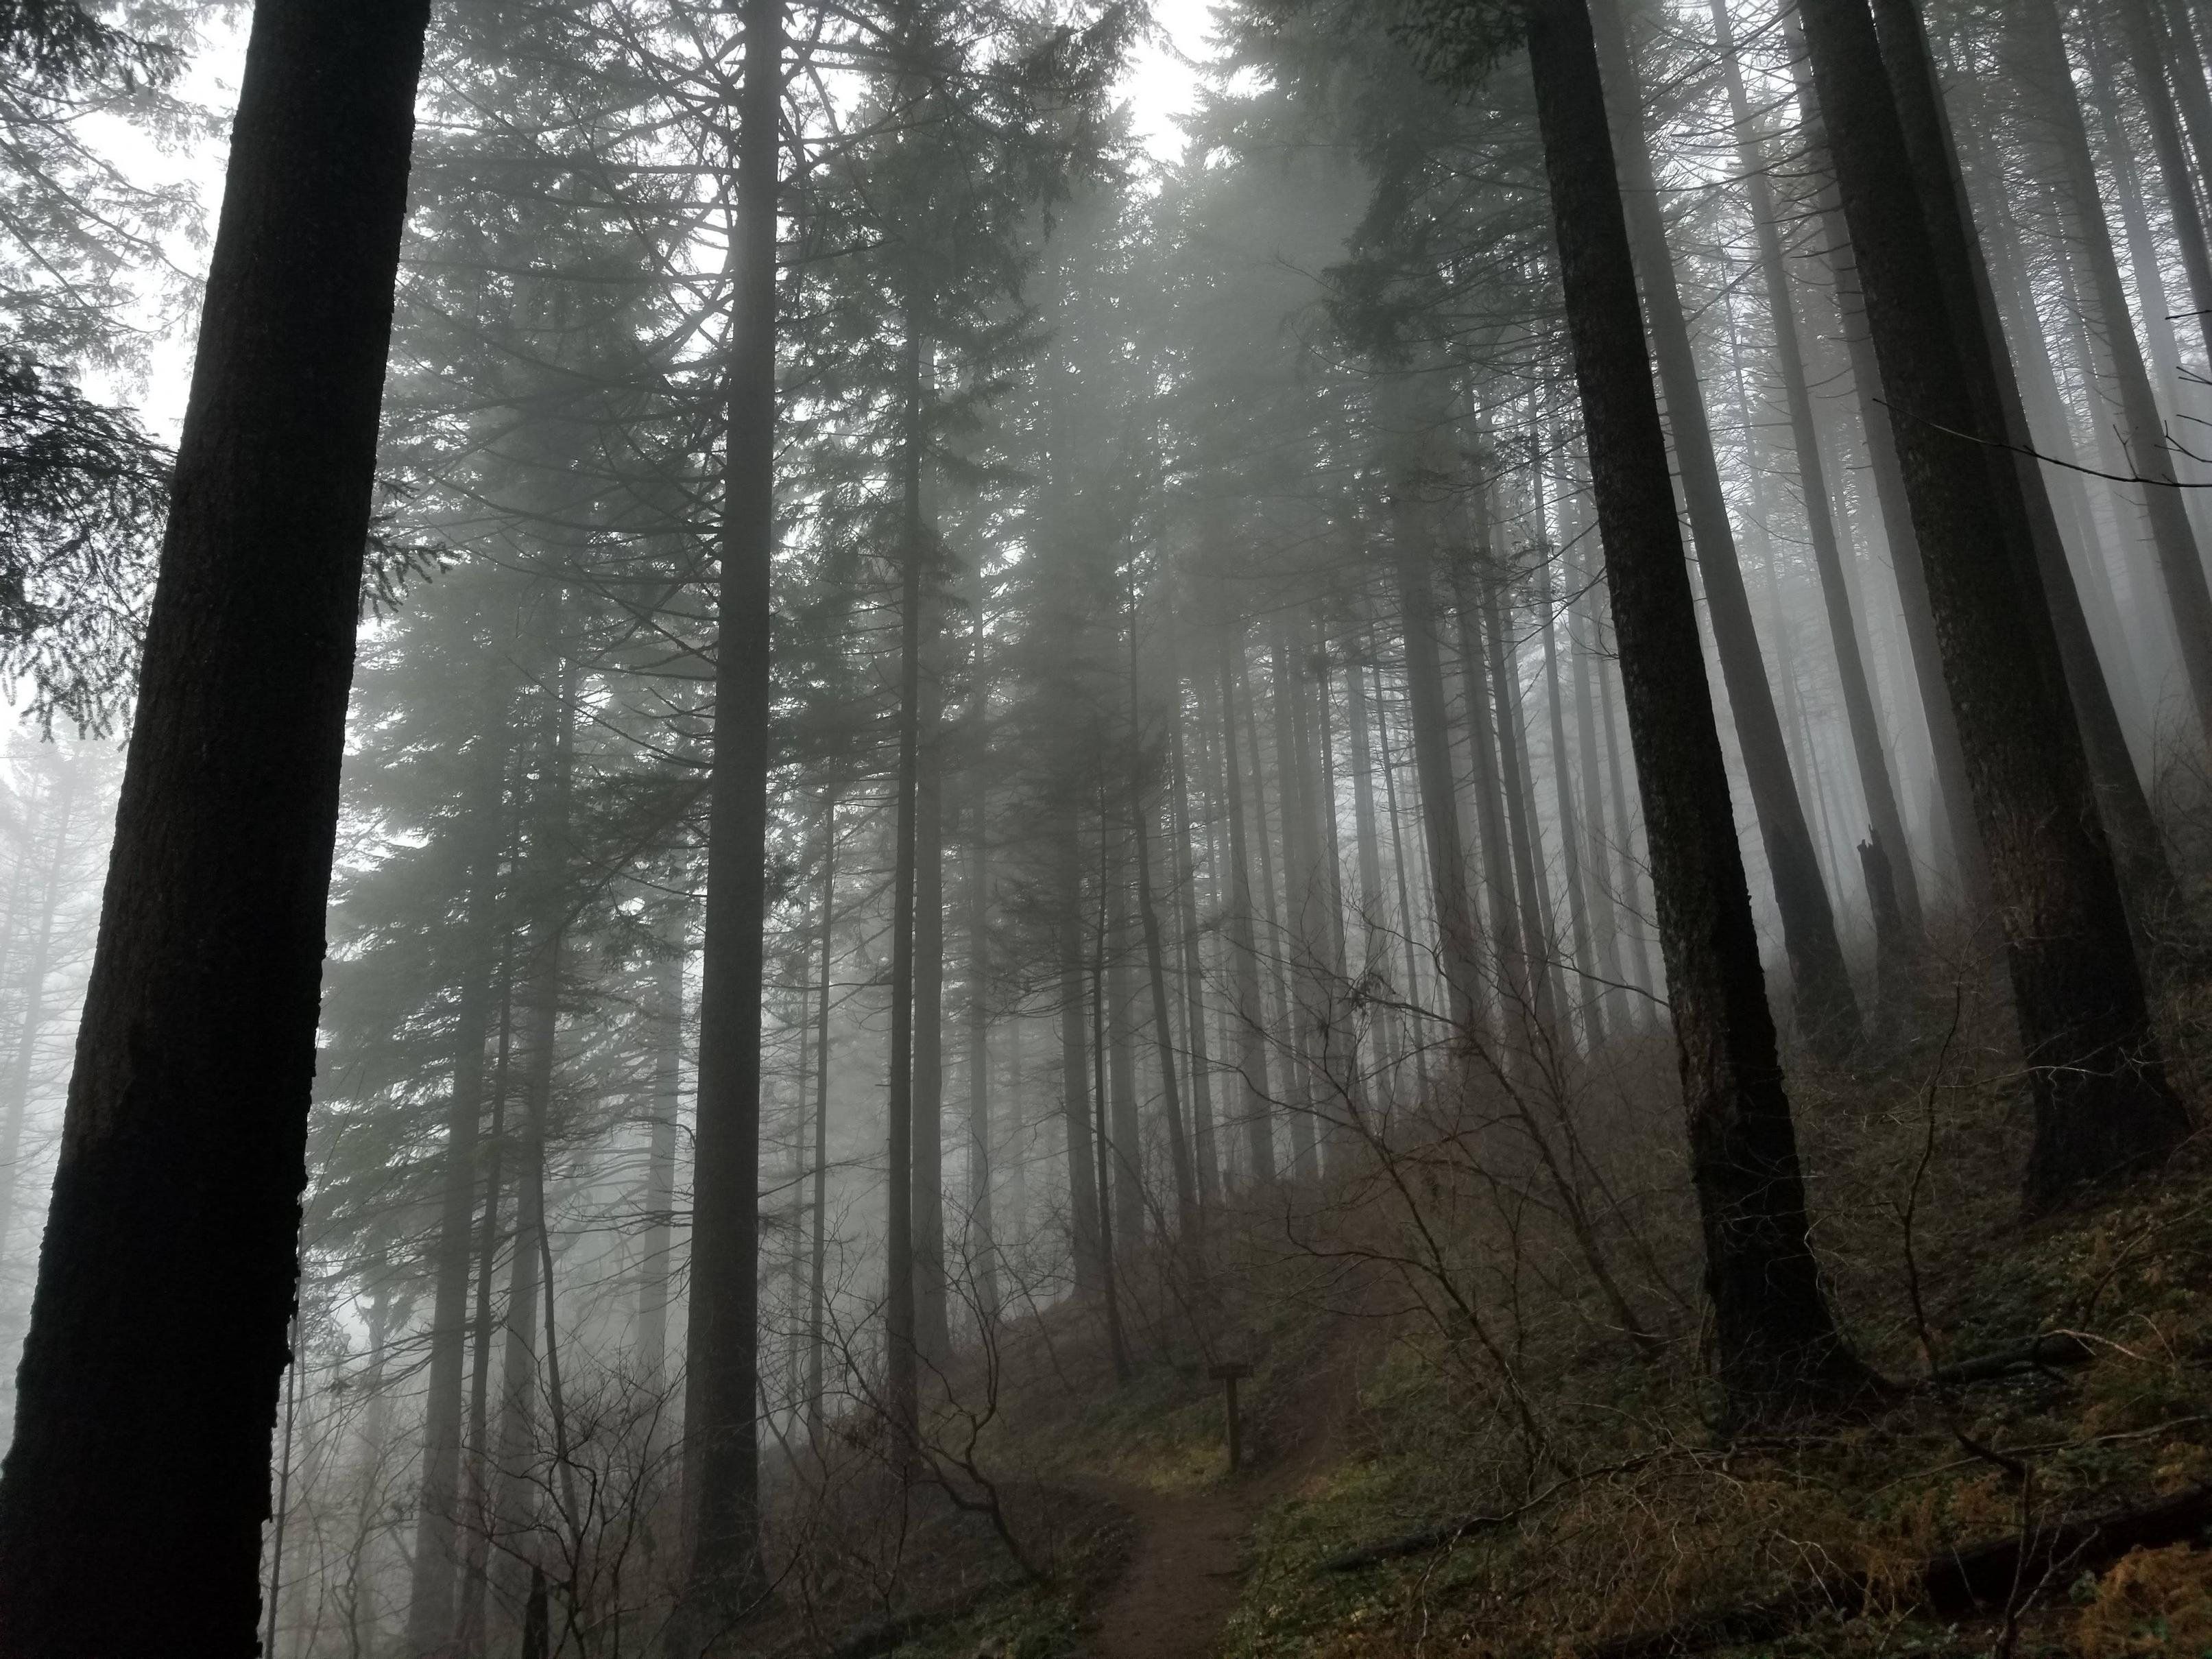 A trail in the woods on foggy day - Woods